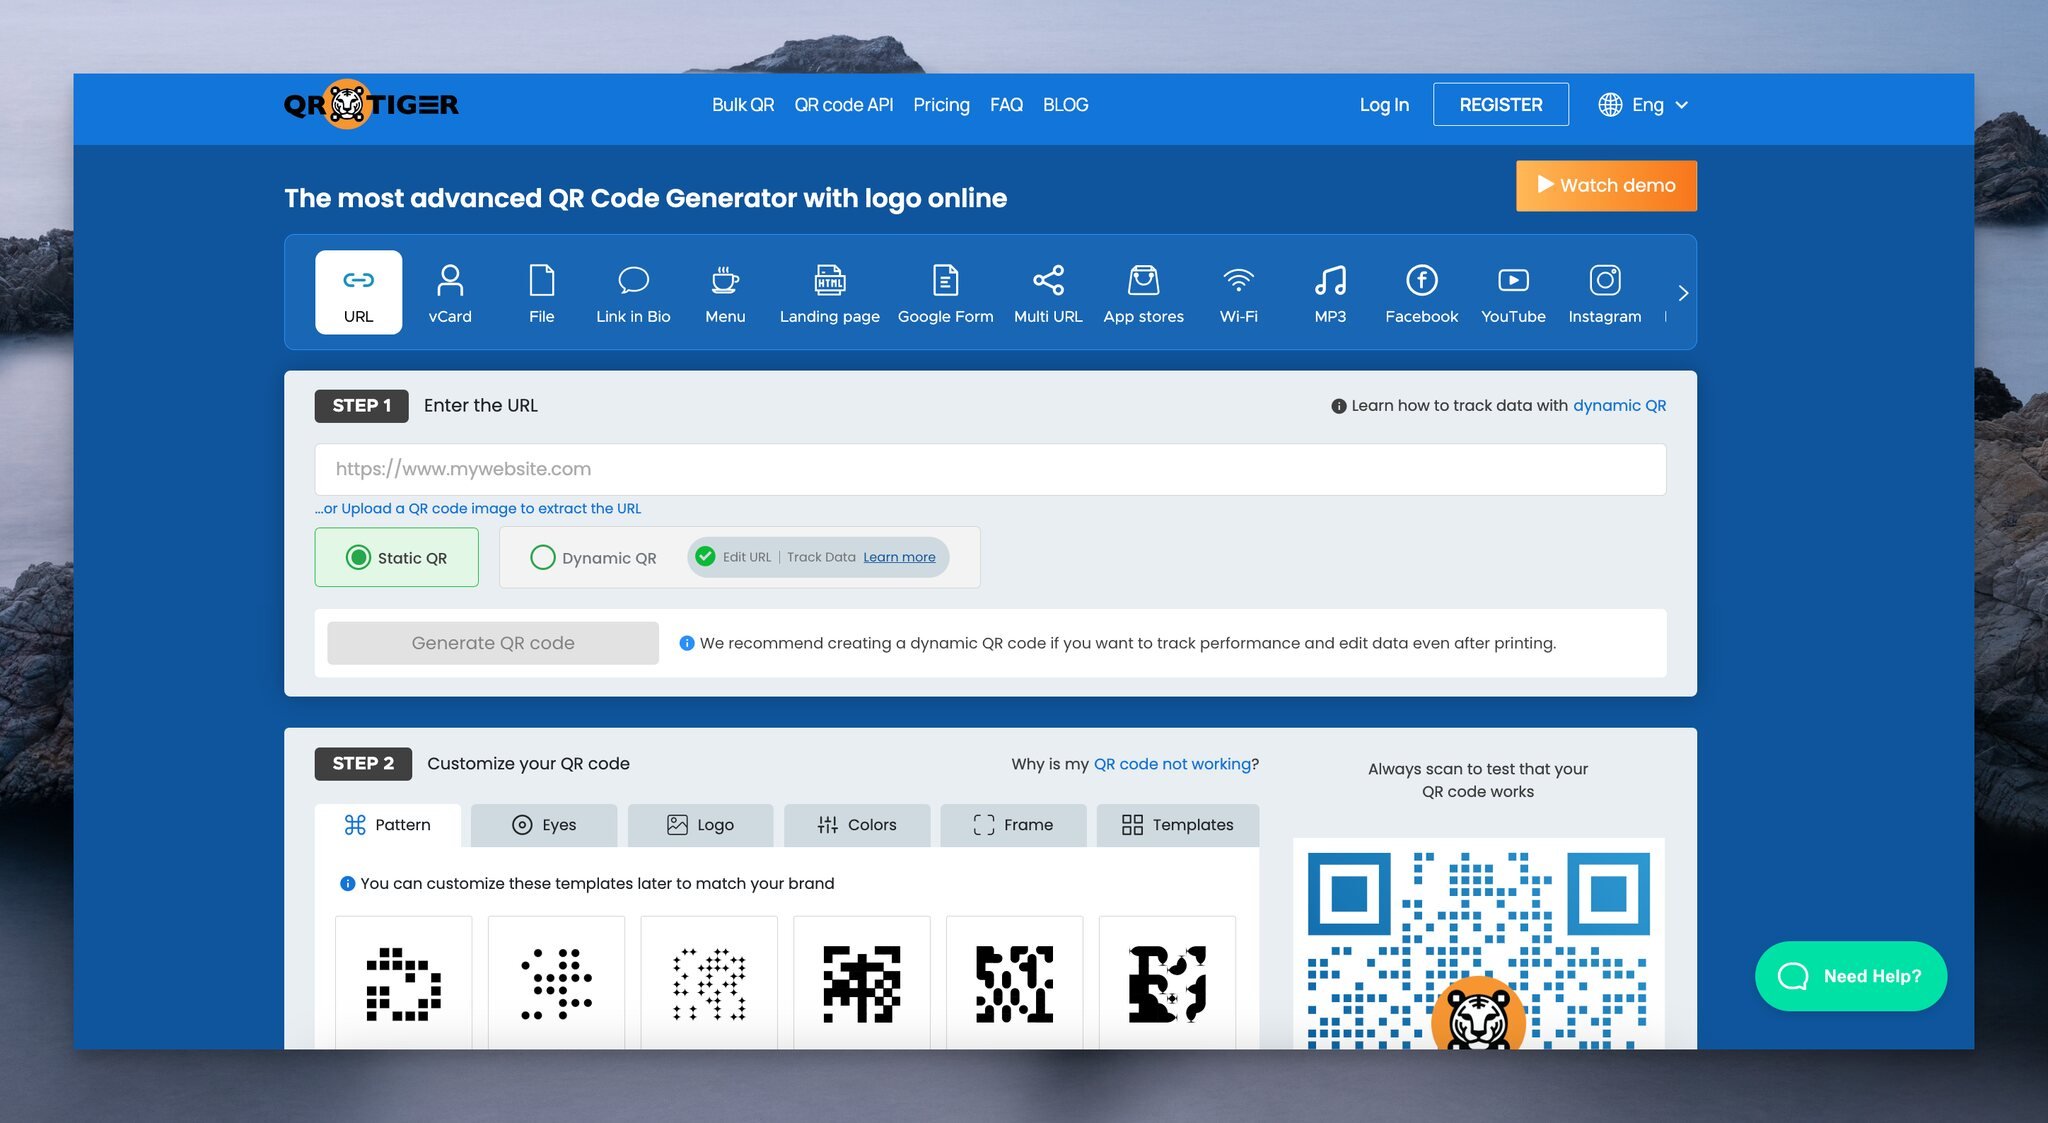 QRtiger qr code generator's homepage with the QR code types listed next to each other on top and there is a URL box below followed by QR code customization steps